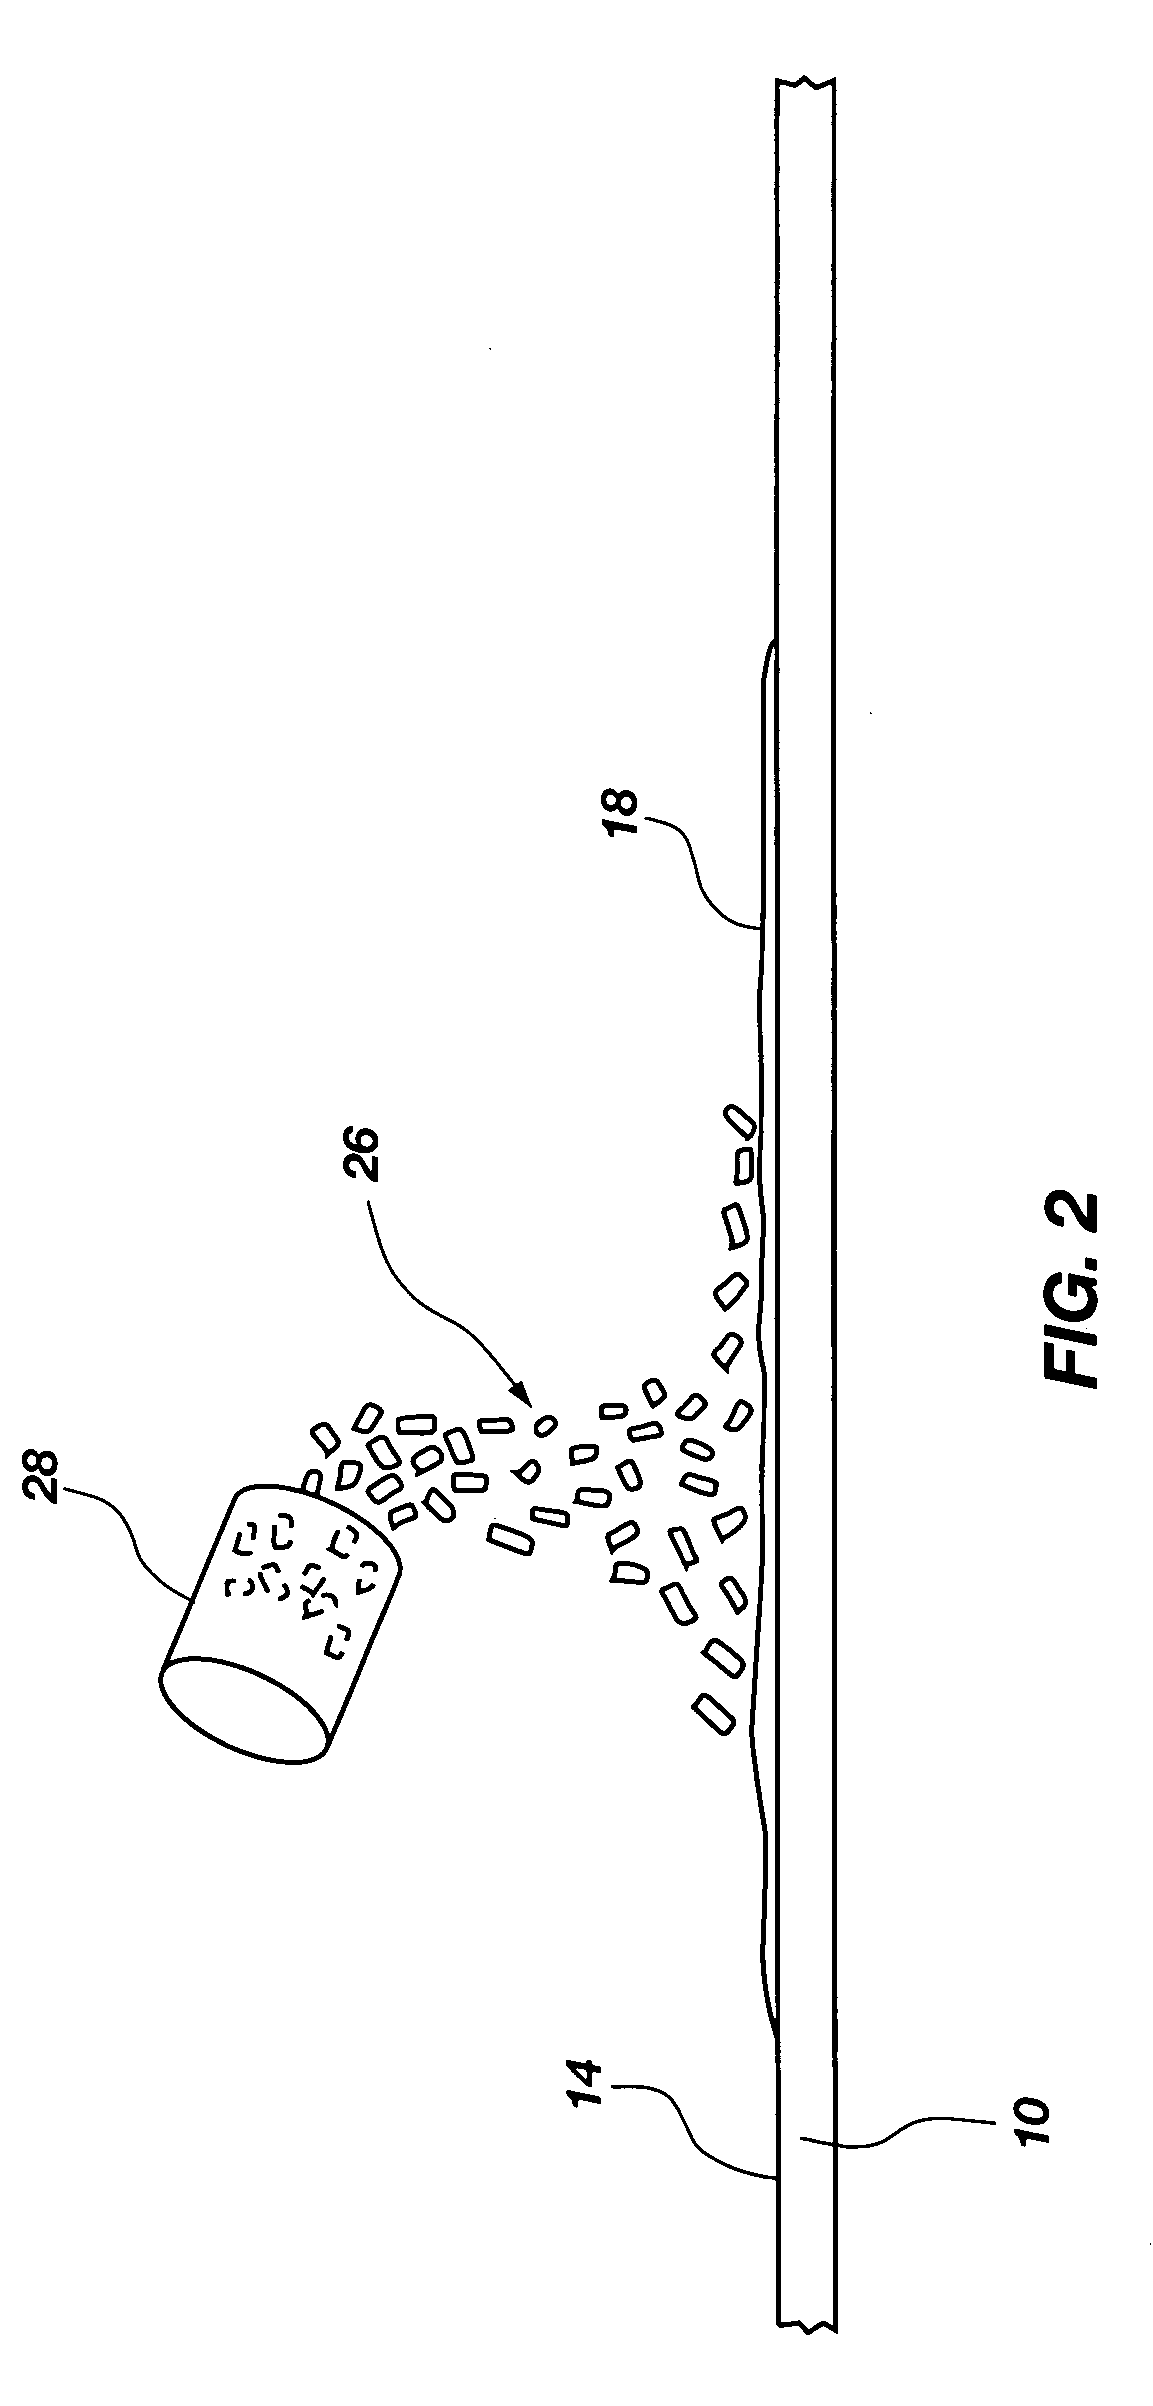 Method for cleaning fluid spills using biodegradable absorbent material and for transporting the same